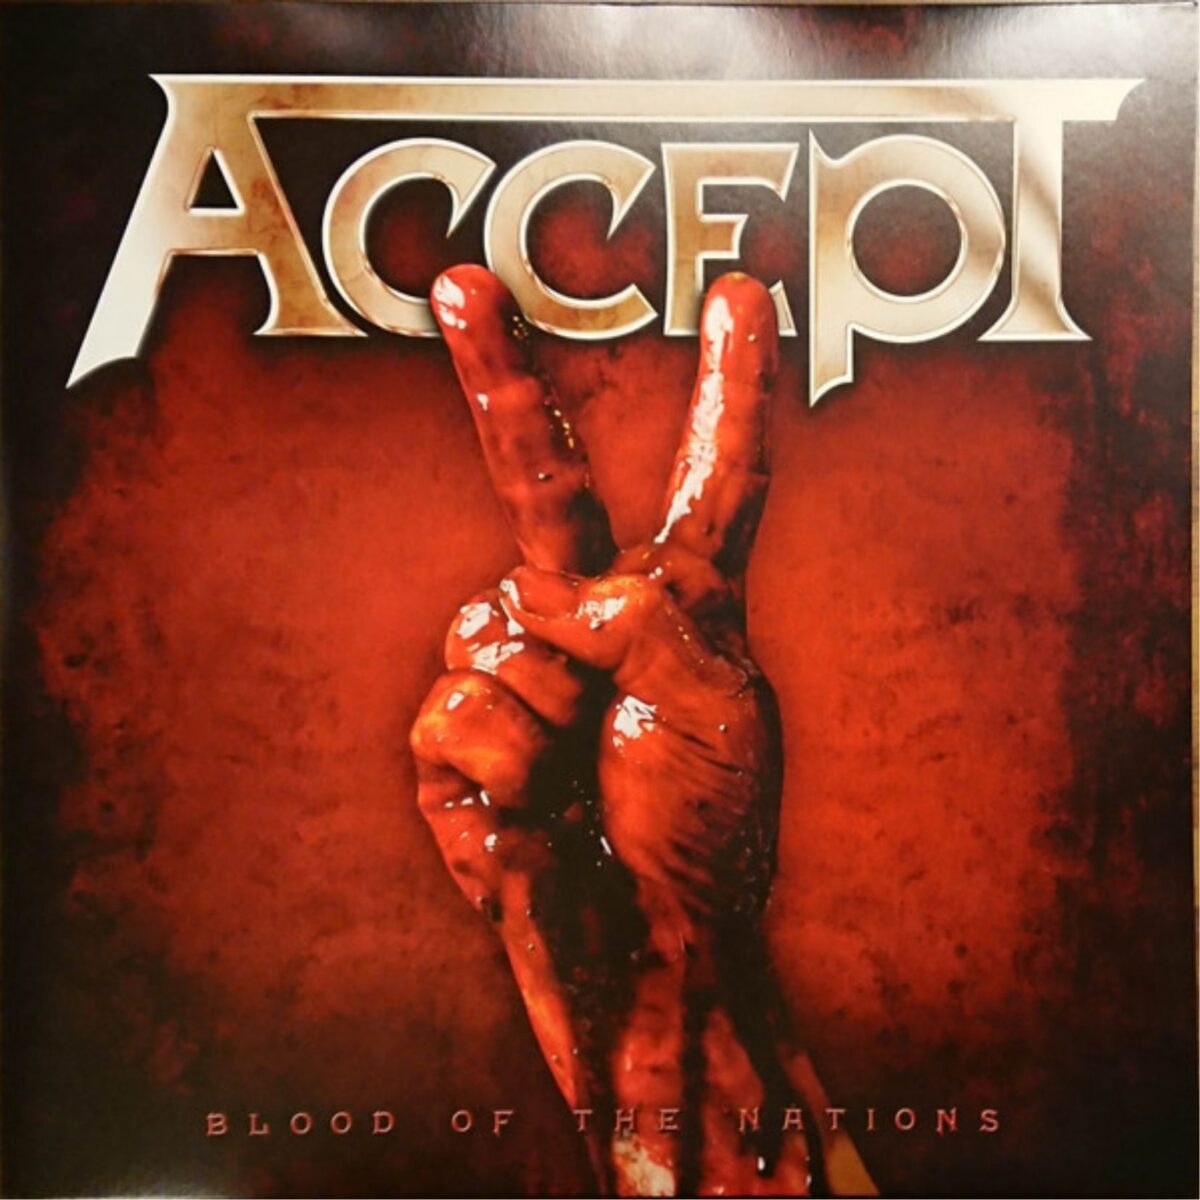 Blood of the Nations "Accept"album cover.